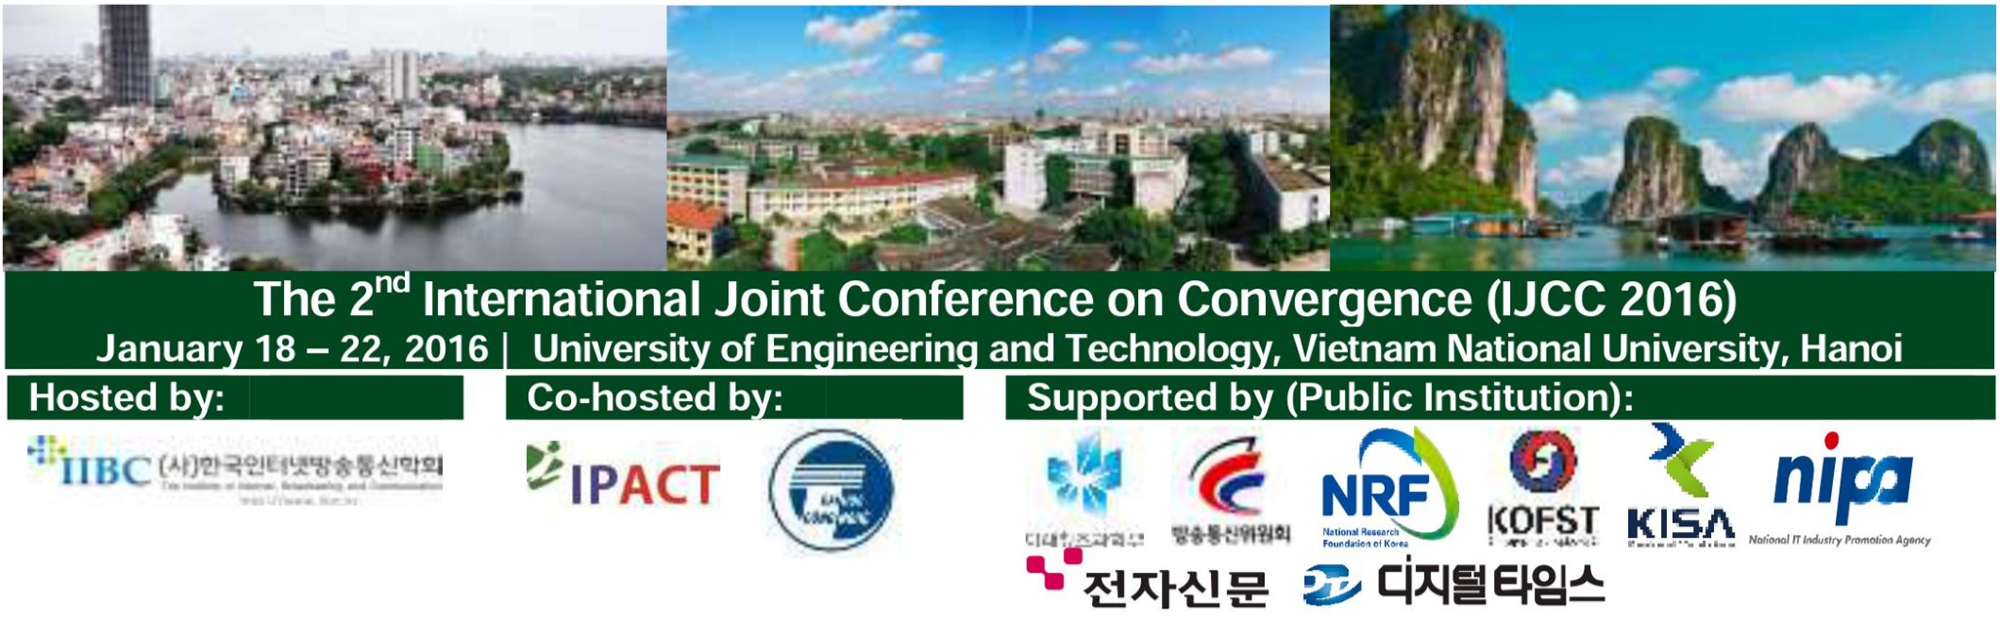 The 2nd International Joint Conference on Convergence